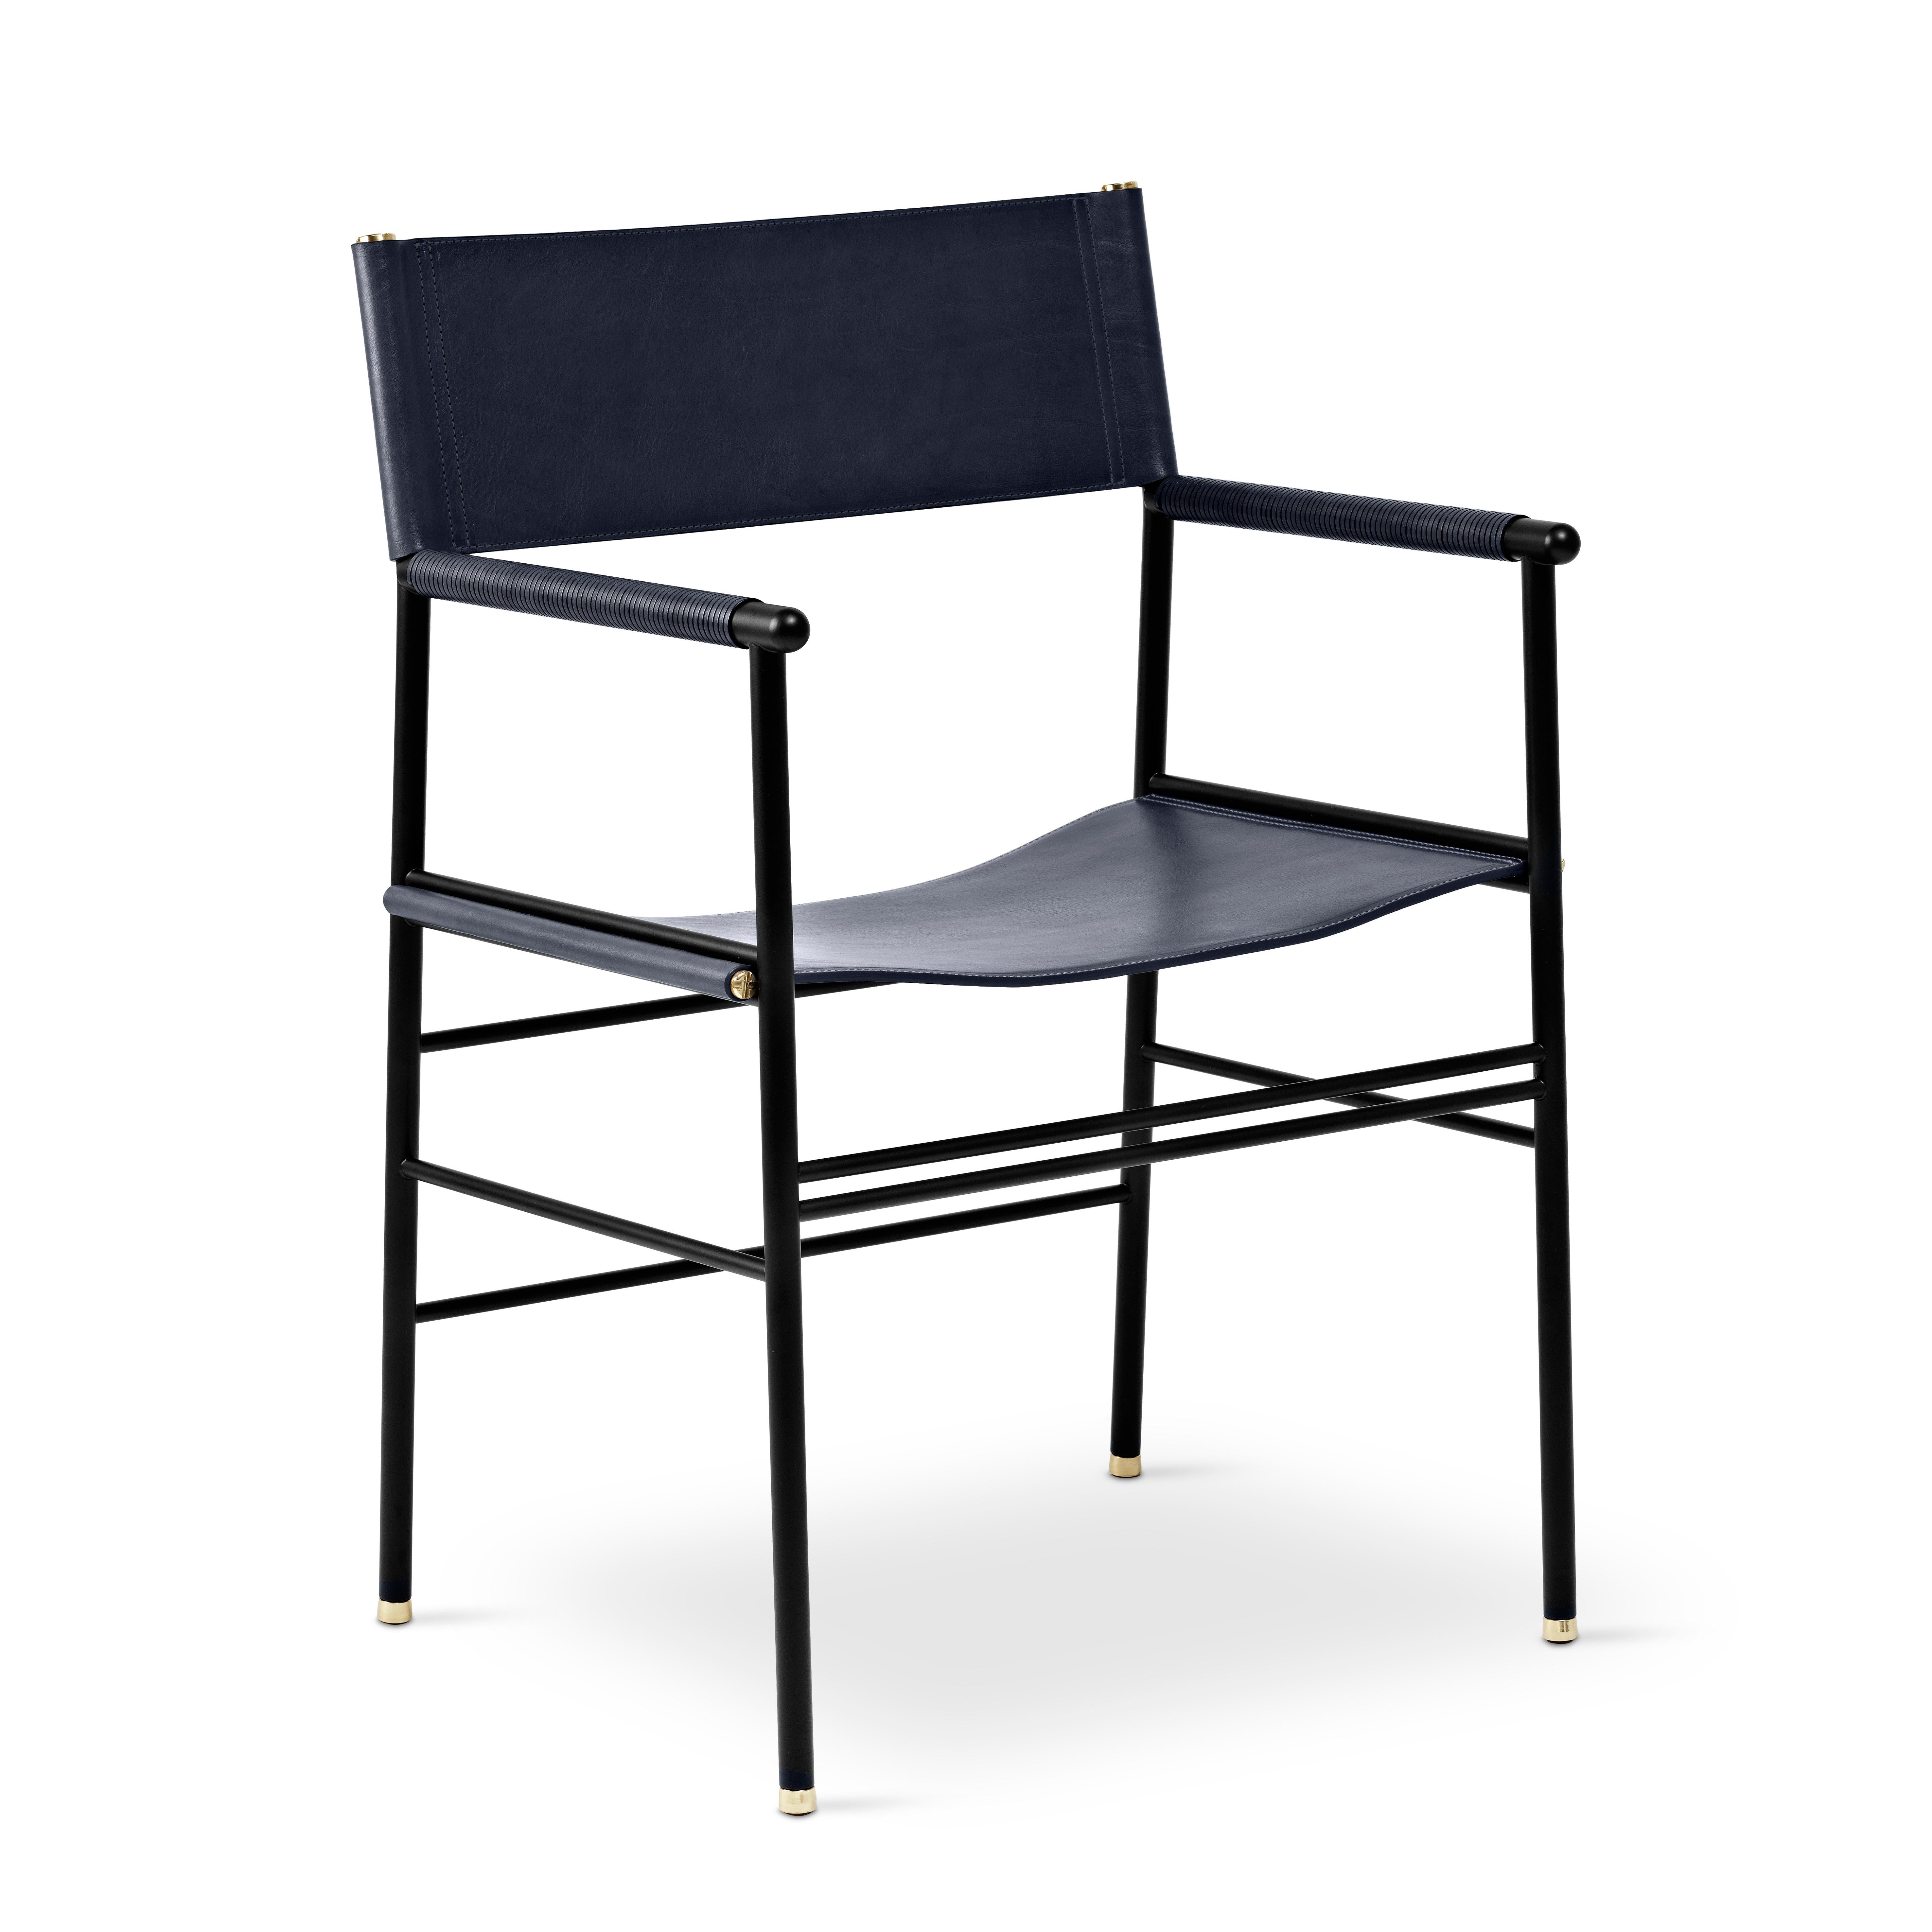 Spanish Set of 4 Artisanal Contemporary Chair Navy Blue Leather & Black Rubber Metal For Sale